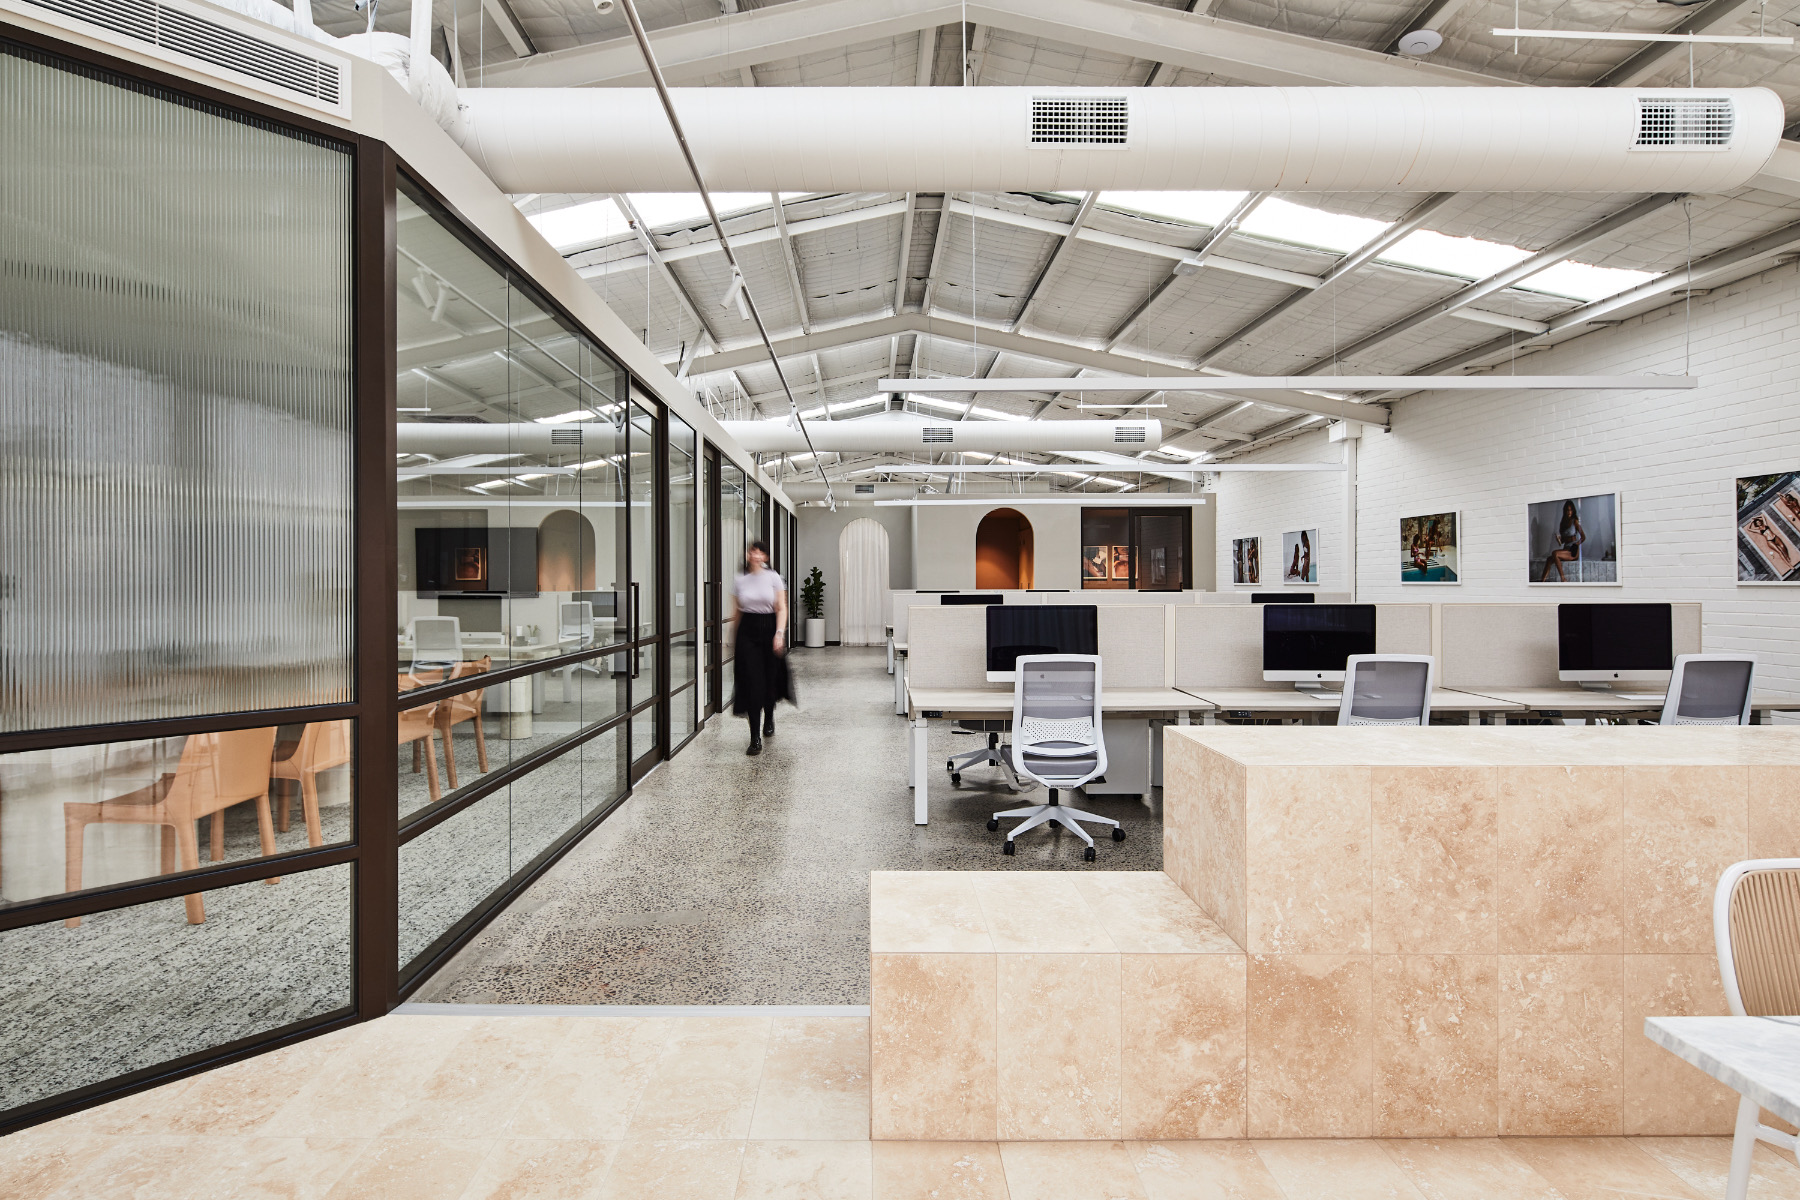 A Tour of Made For’s New Melbourne Office